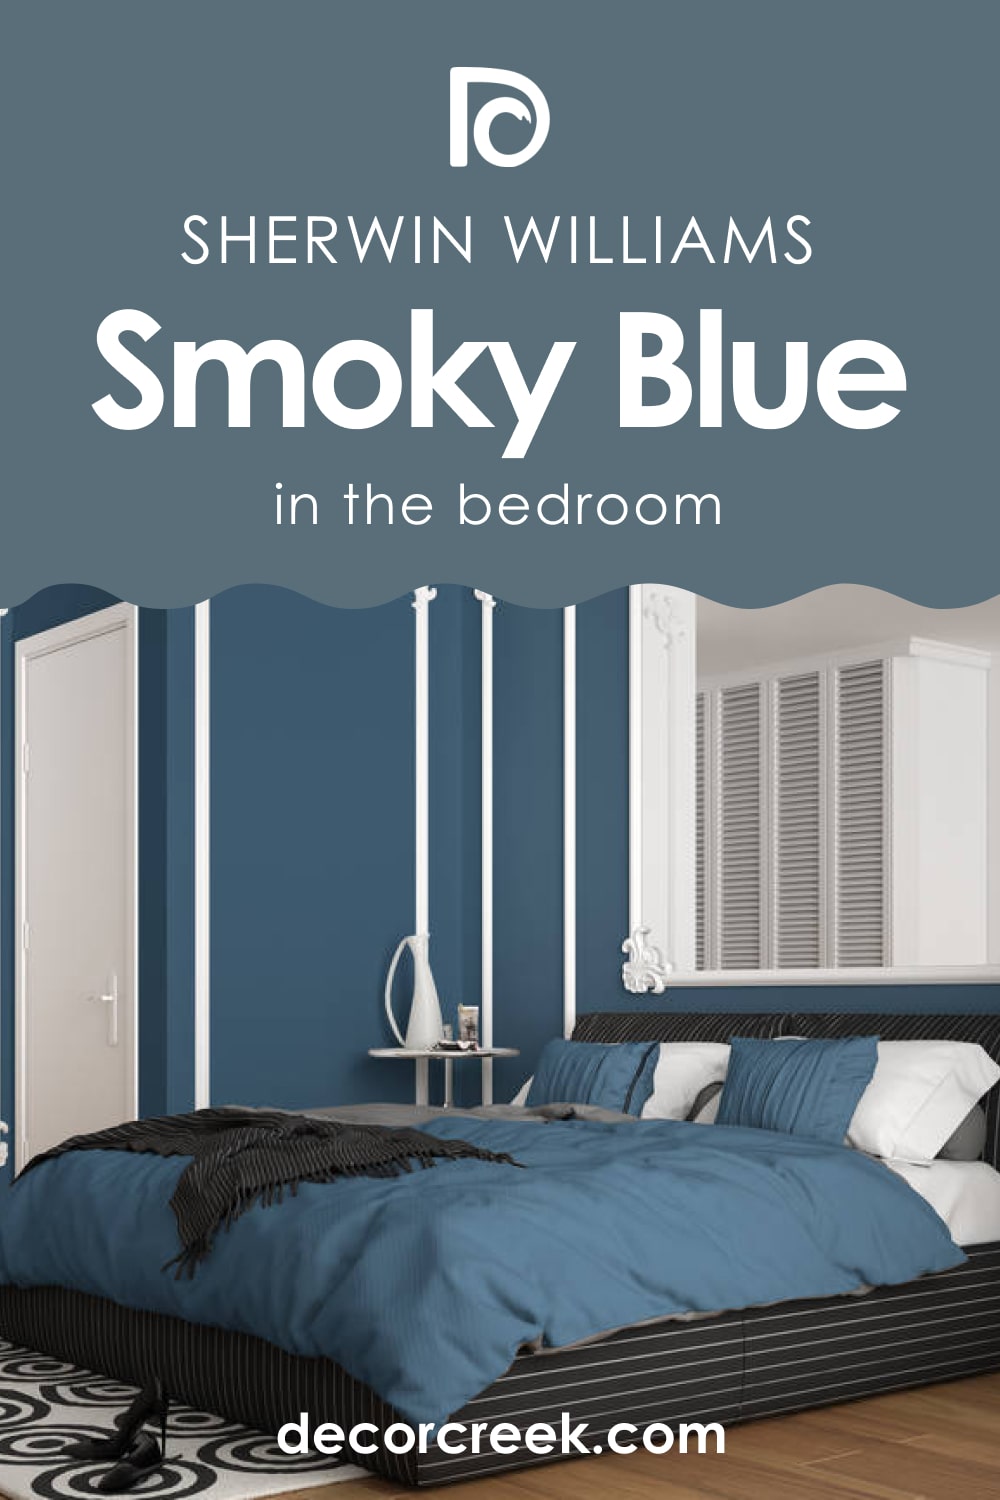 Smoky Blue SW-7604 and Bedroom